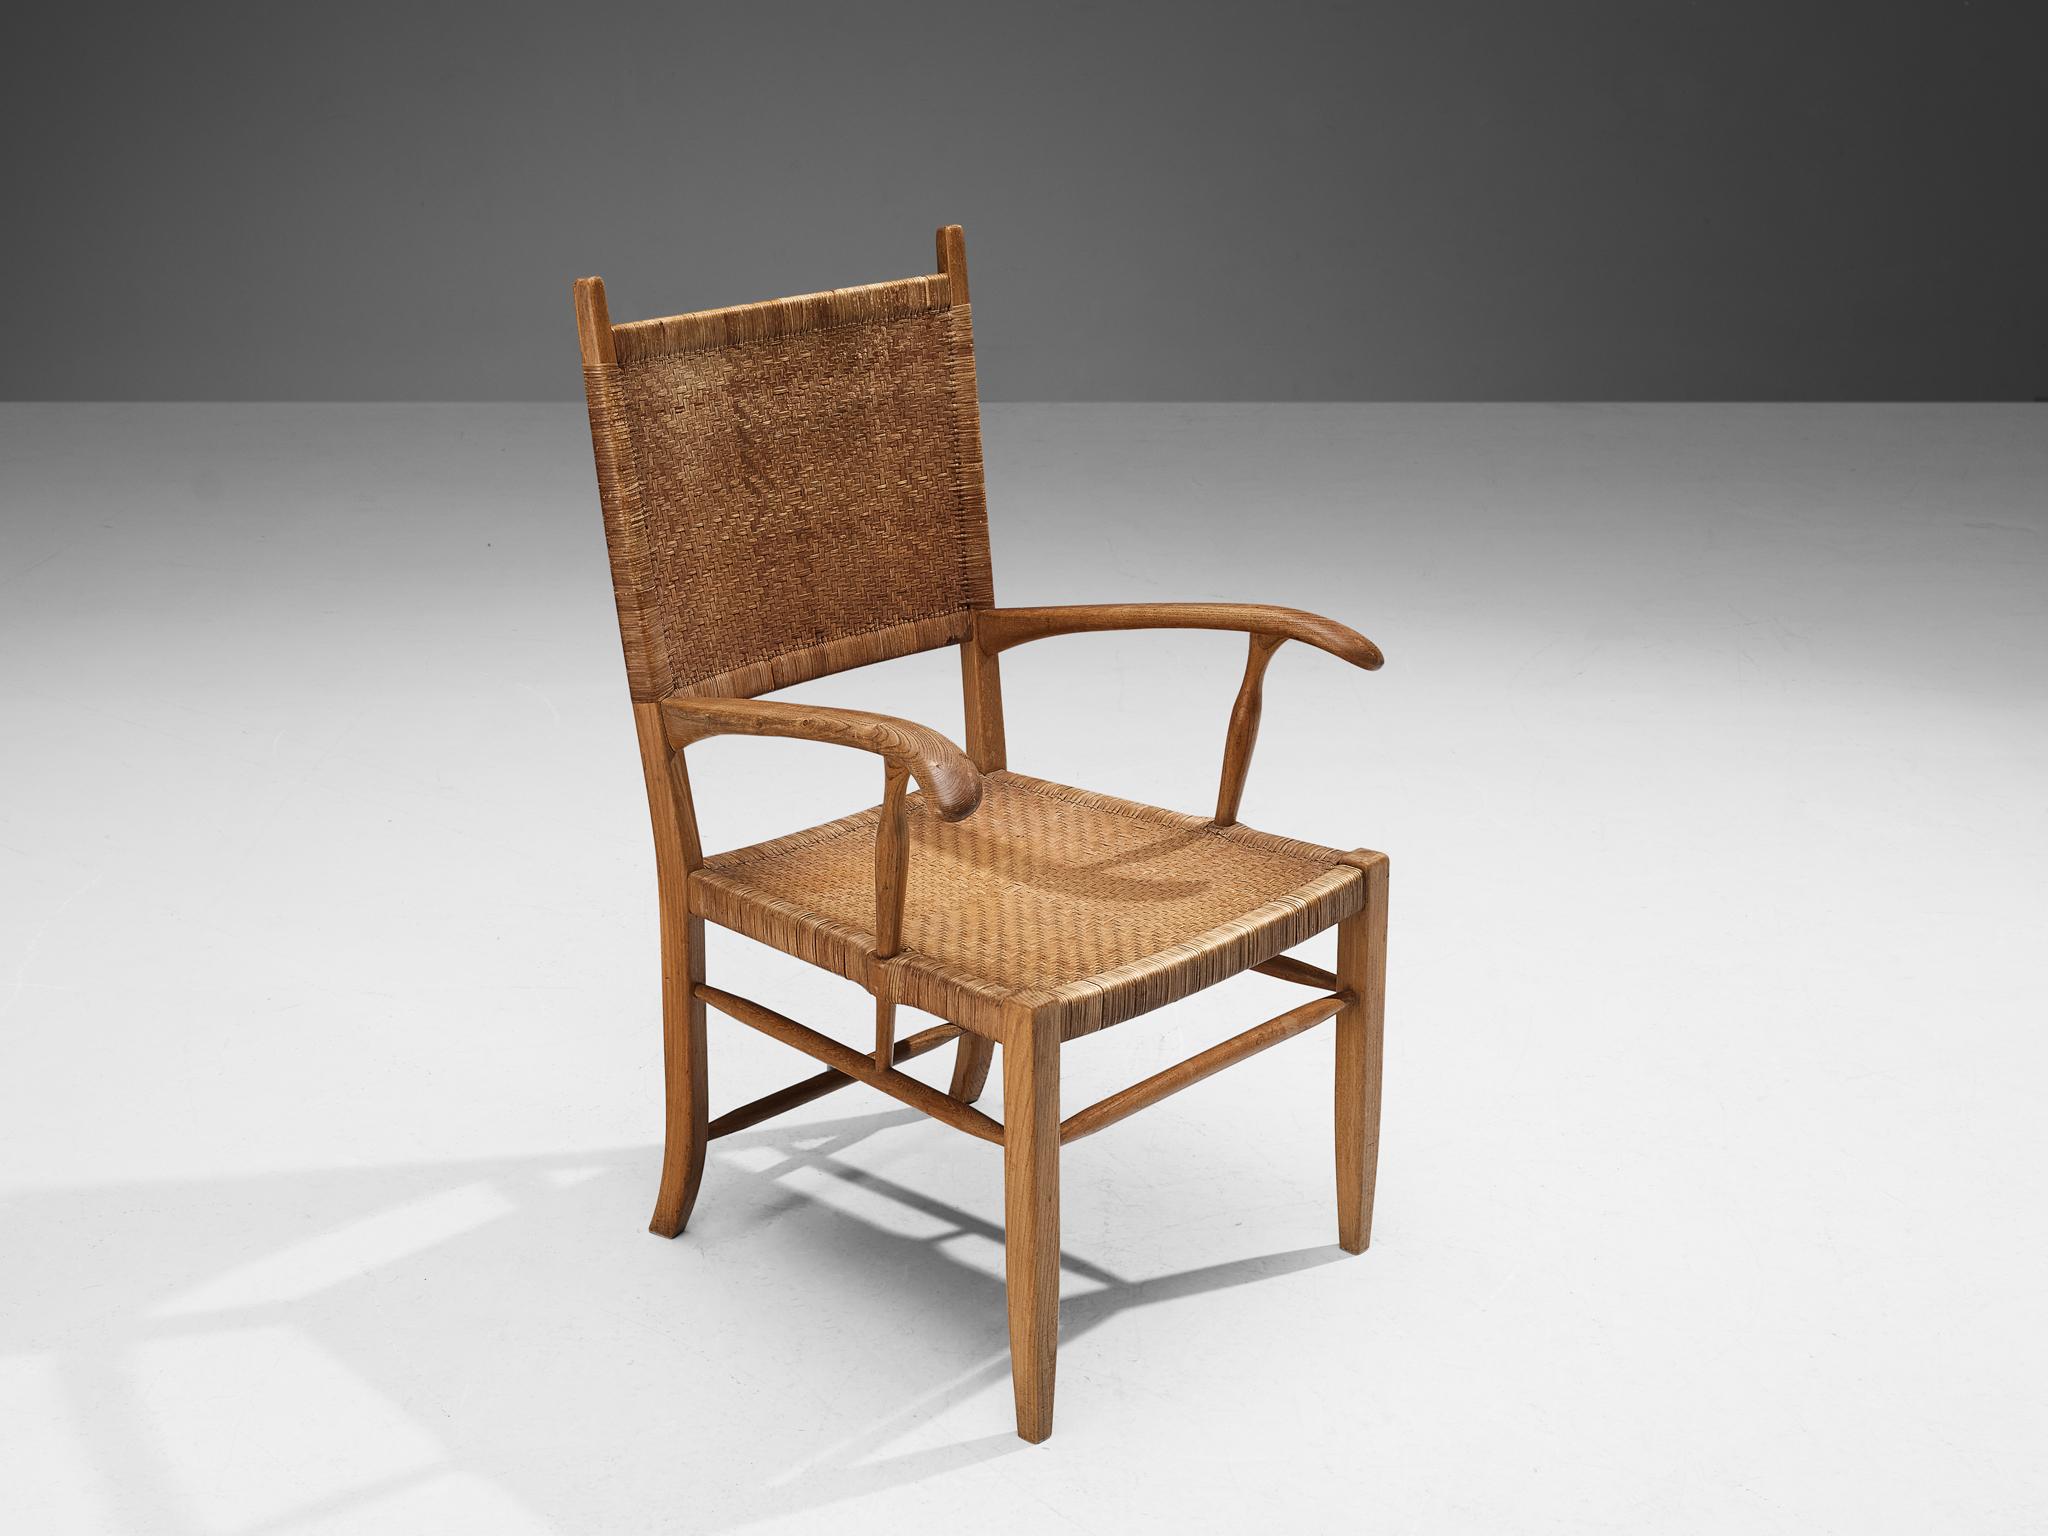 Armchair, ash, cane, The Netherlands, 1950s.

This elegant armchair features a warm ash wooden frame. The stately high back makes this piece of furniture very remarkable. The backrest is furnished with woven cane, and blends nicely with the color of